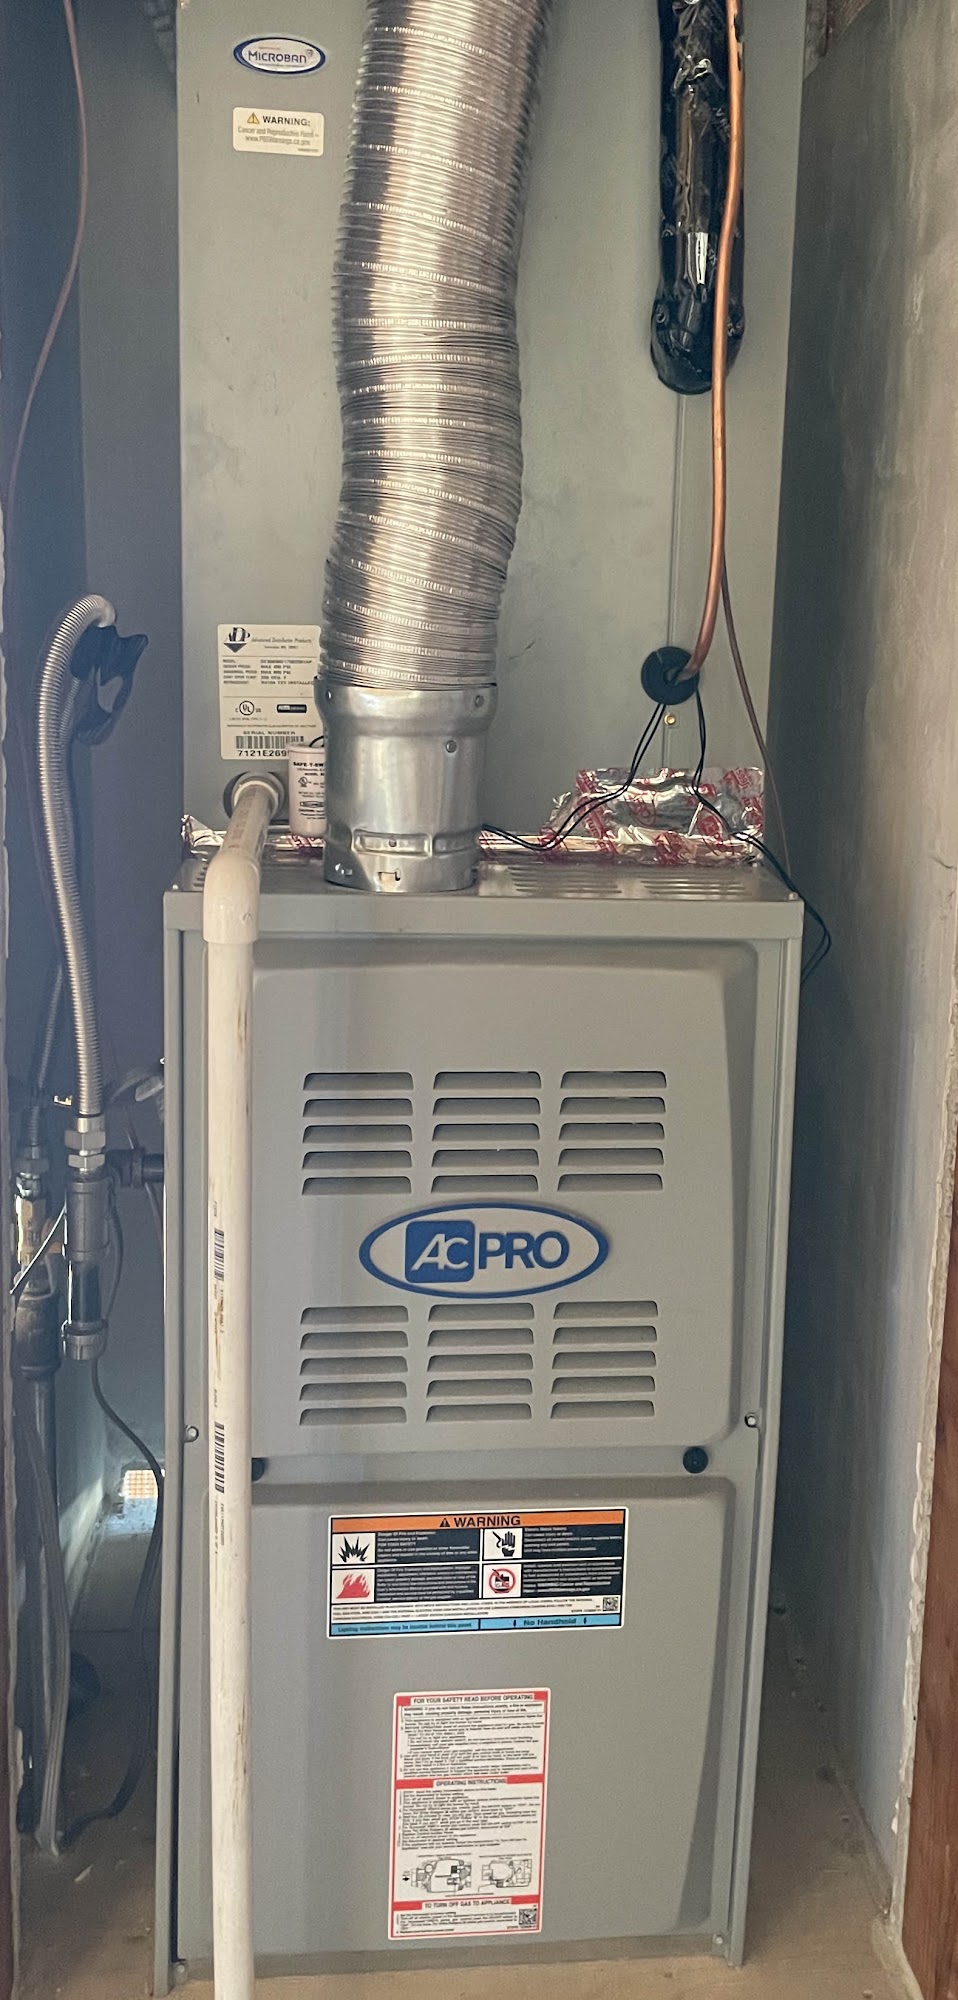 SDair Heating and Air Conditioning